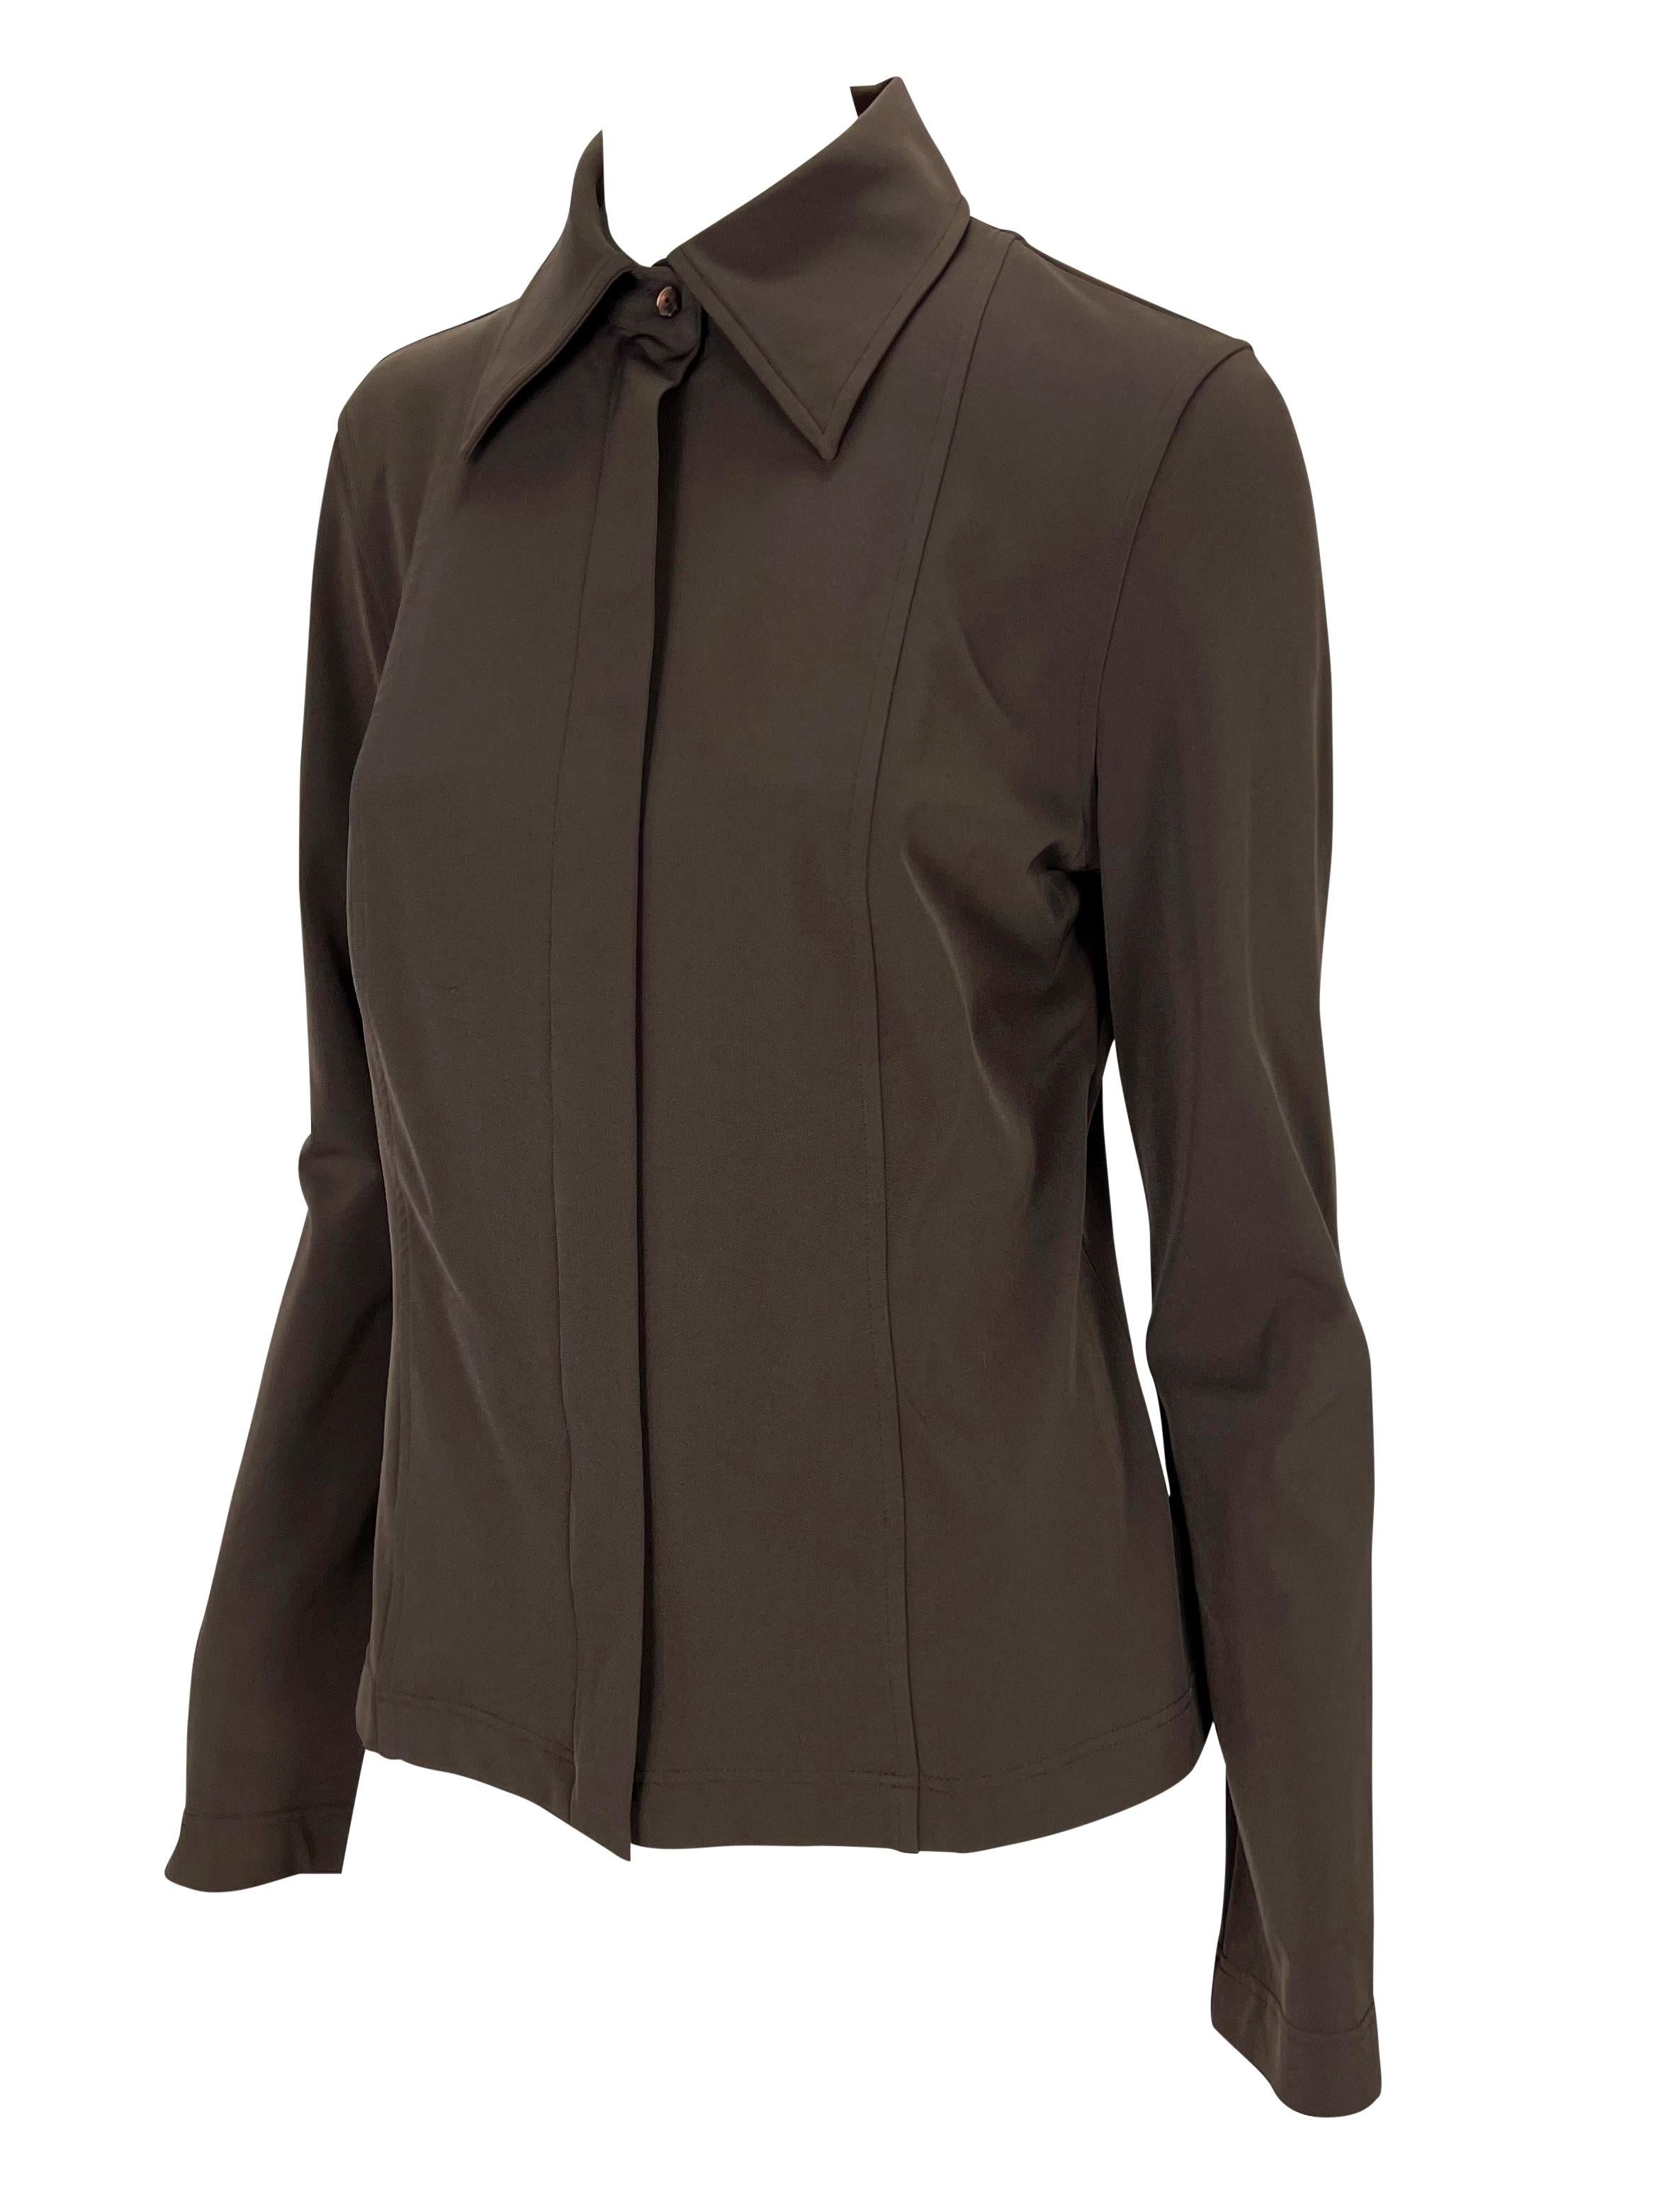 Presenting a beautiful brown Gucci zip-up collared blouse, designed by Tom Ford. From the Fall/Winter 1997 collection, this top is made complete with a concealed zipper closure and collar.

Approximate measurements:
Size - IT42
23.5